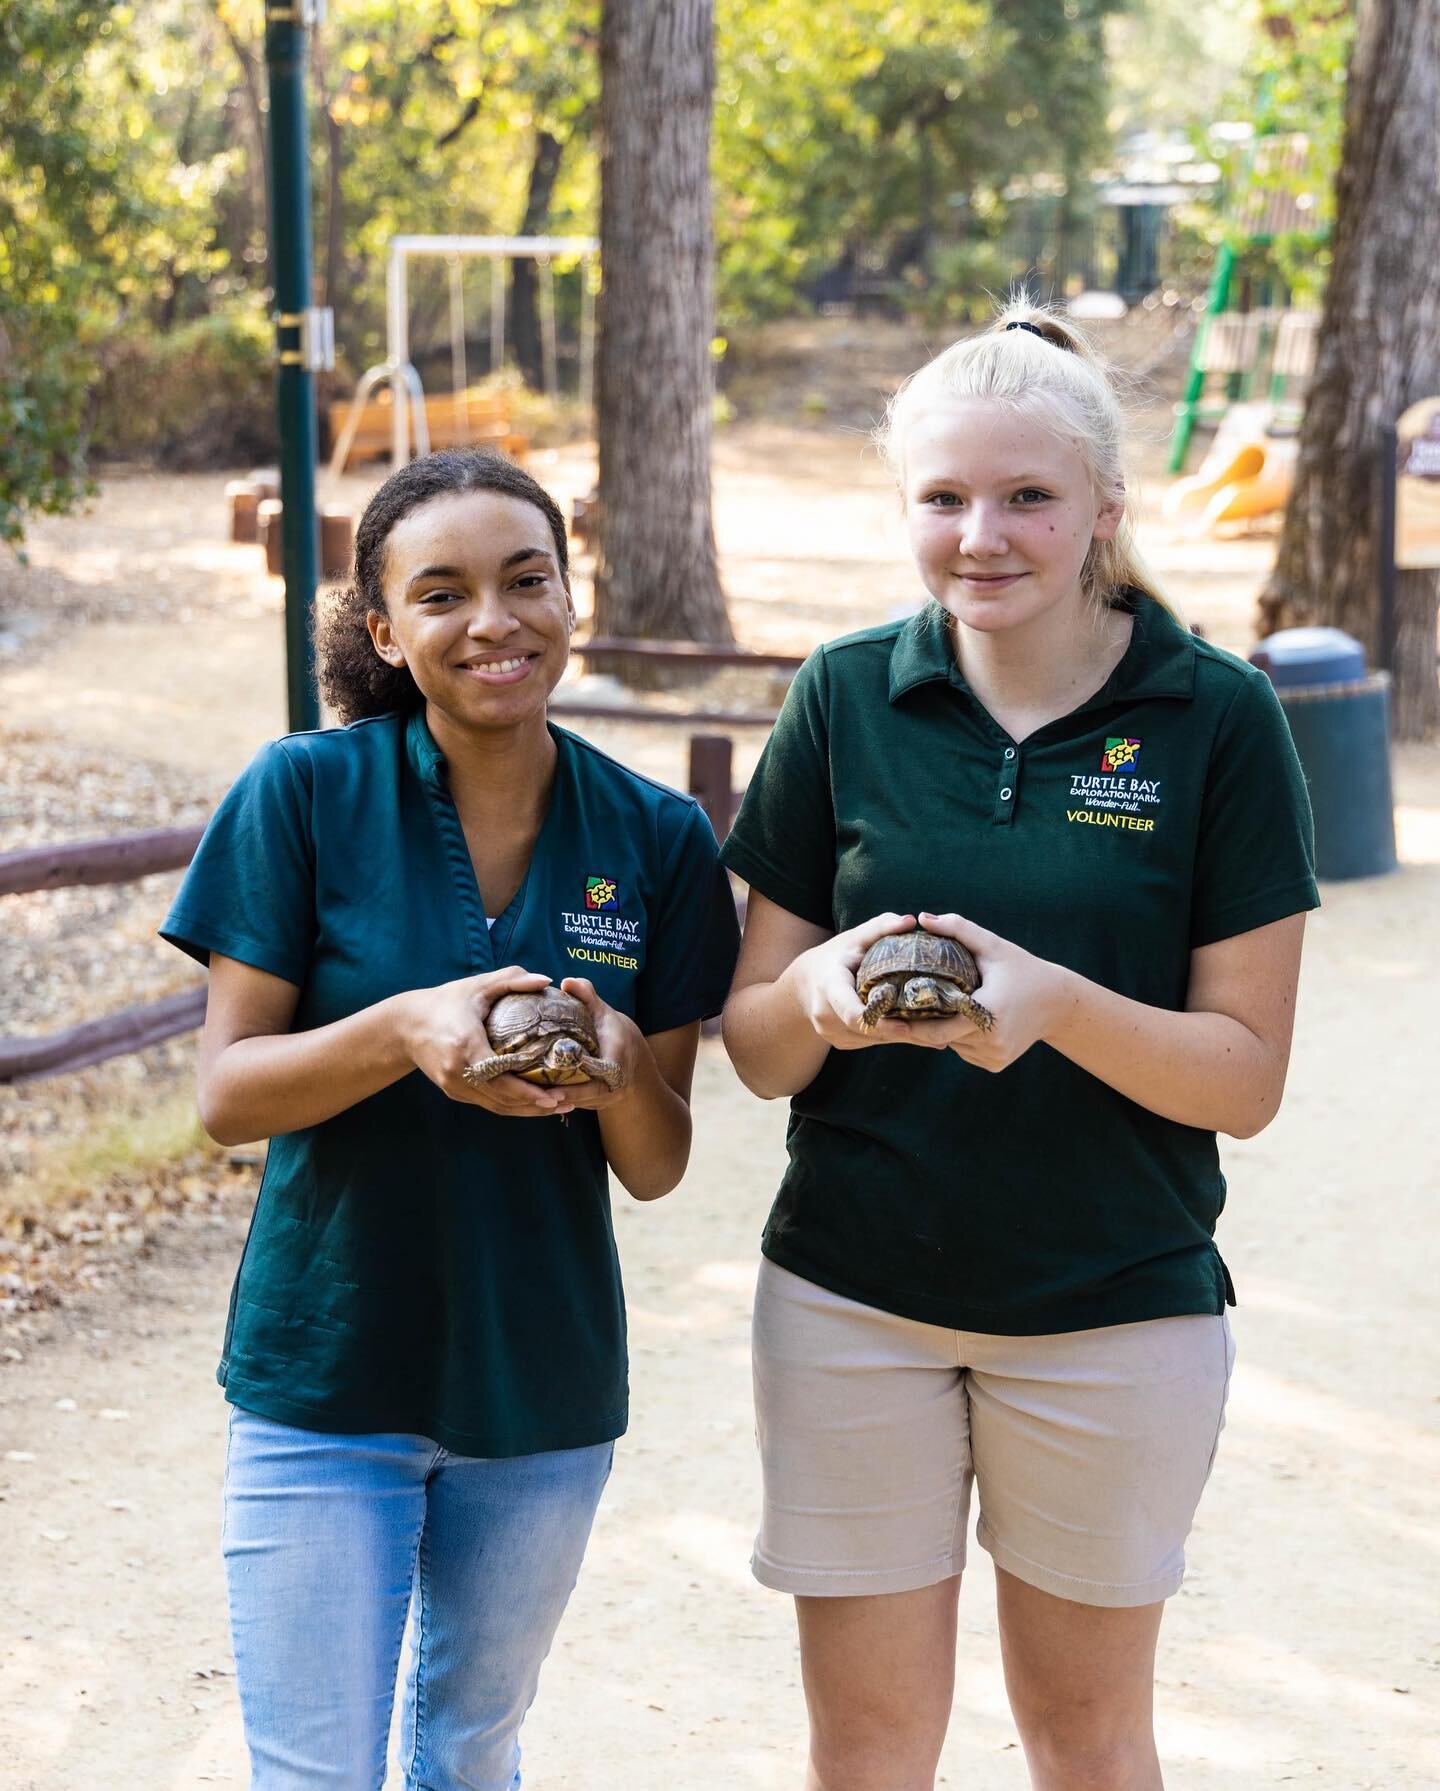 Happy National Wildlife Day! Our mission is to inspire, explore, and appreciate the diversity and magnificence of wildlife through conservation, education, and entertainment. Paul Bunyan&rsquo;s Forest Camp exhibits wild animals, many of which have b